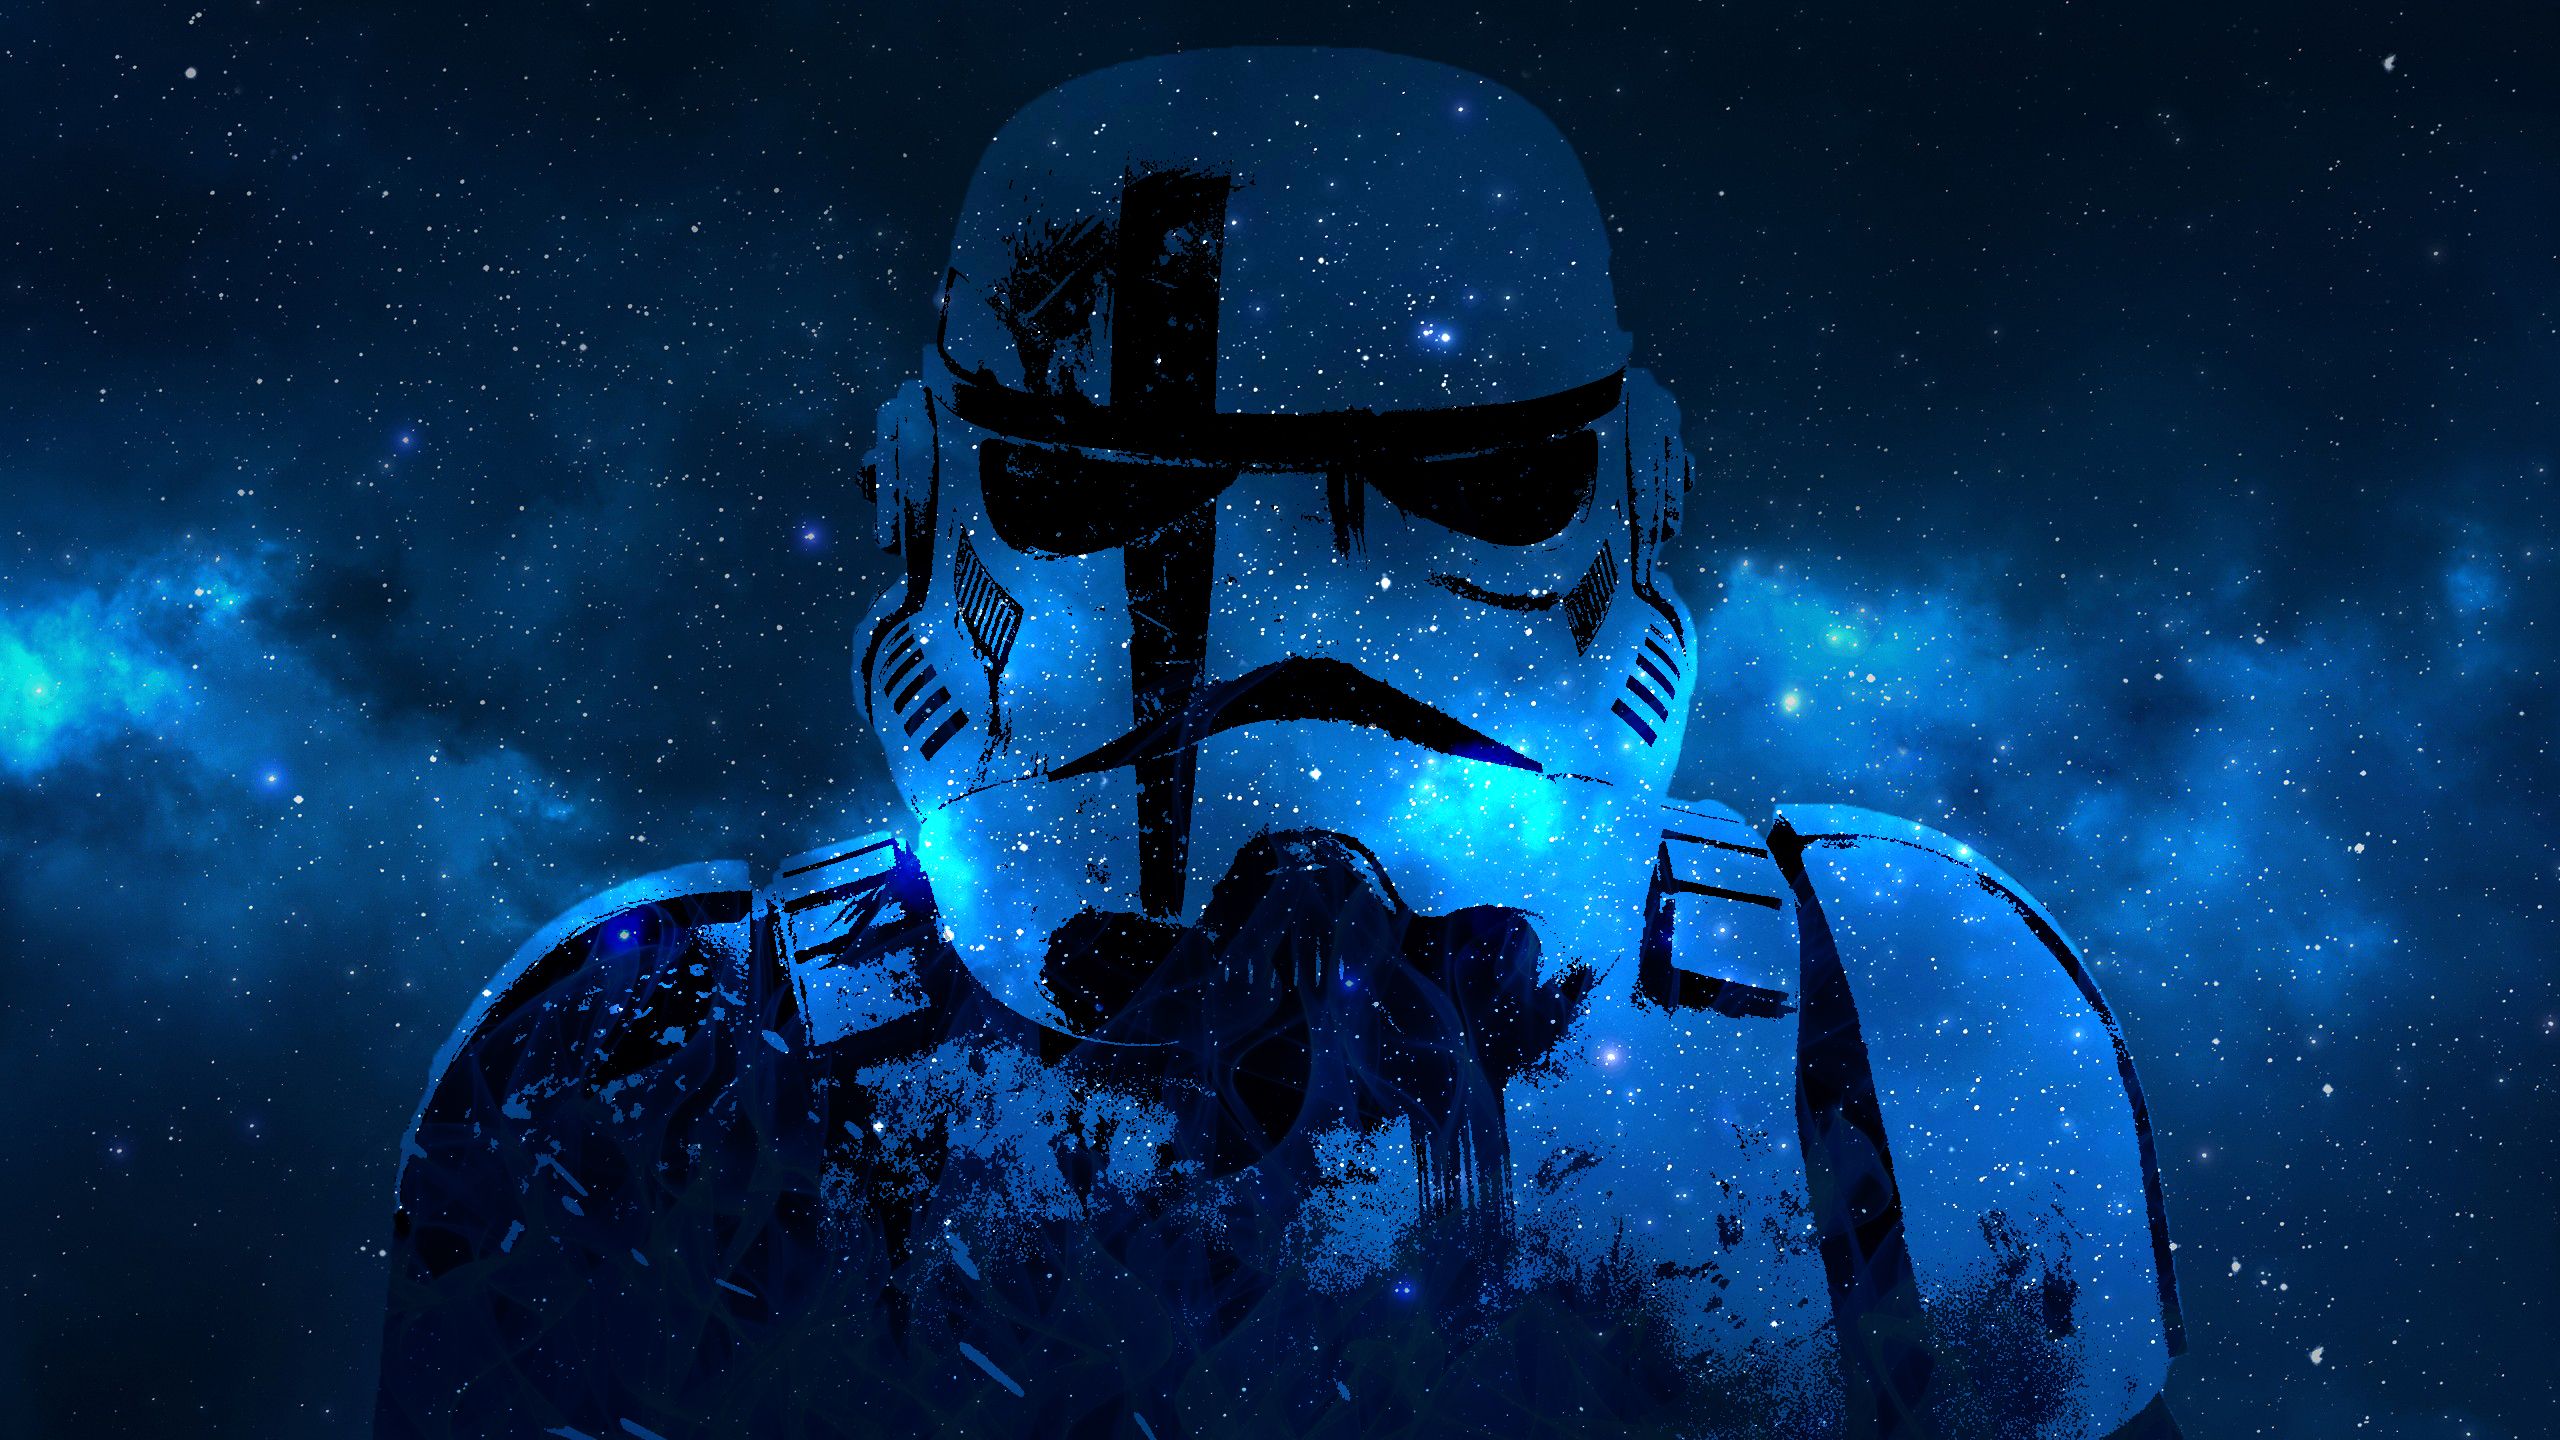 Stormtrooper faded into a galaxy background. Galaxy background, Stormtrooper, Photohop